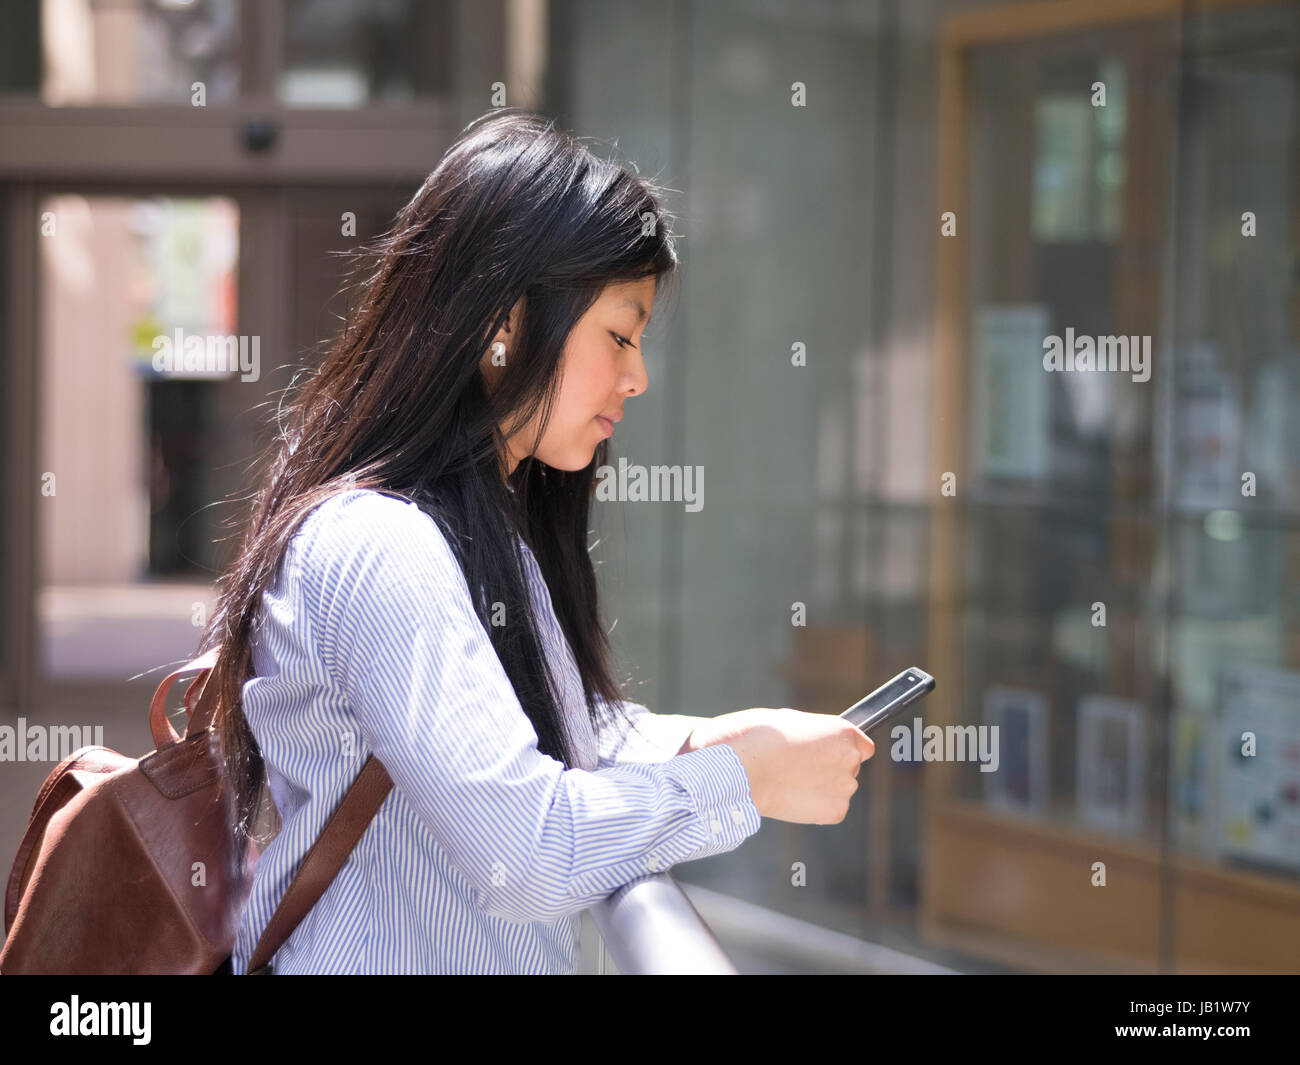 Smiling young Asian female student using her iphone at university campus Stock Photo